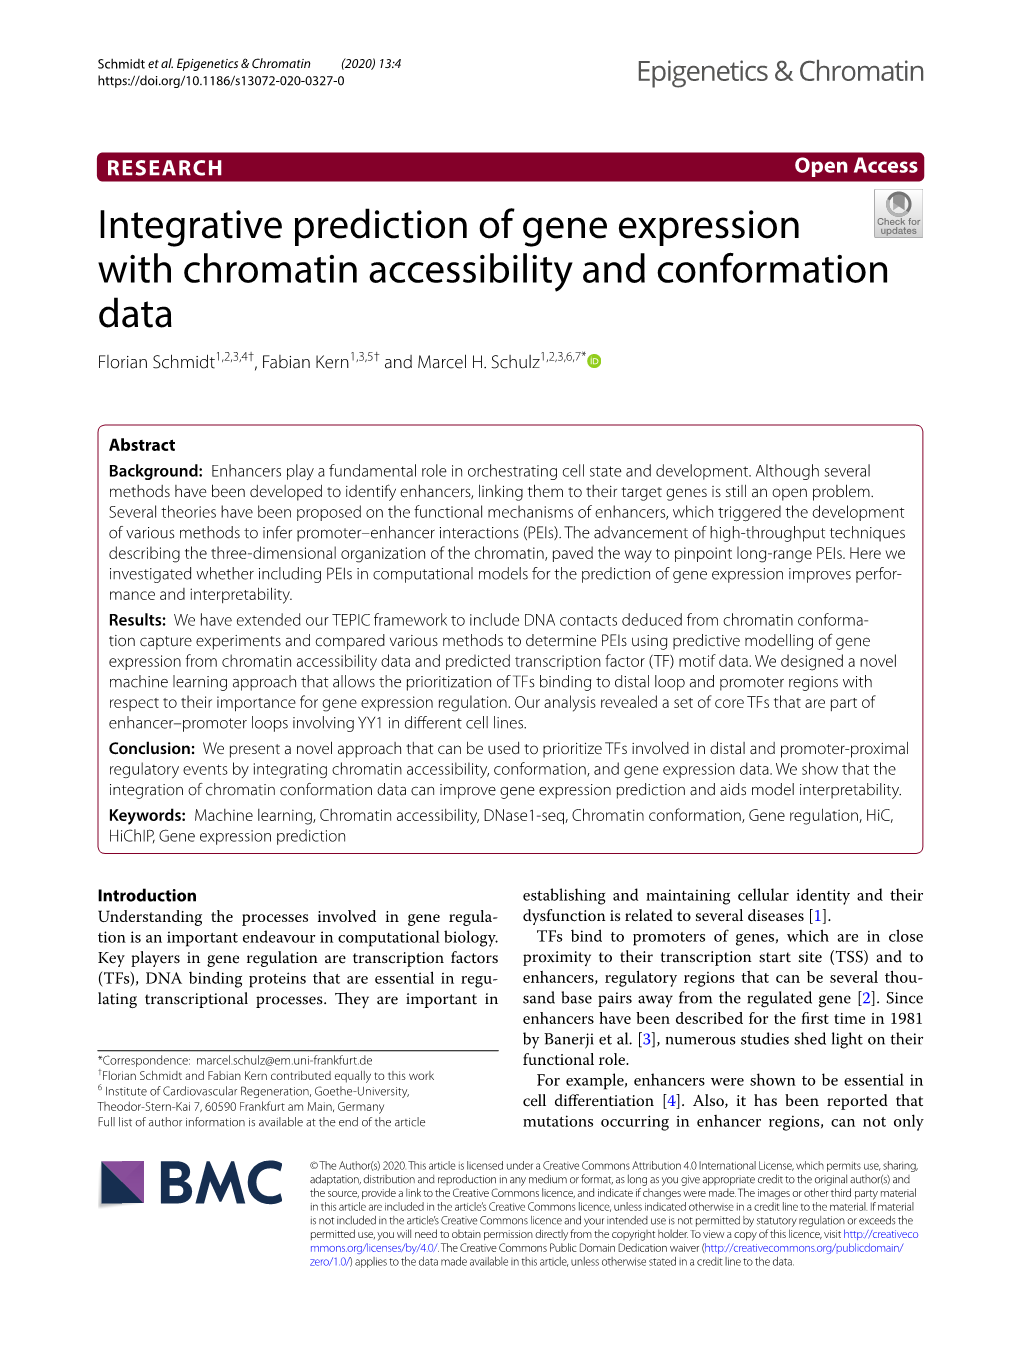 Integrative Prediction of Gene Expression with Chromatin Accessibility and Conformation Data Florian Schmidt1,2,3,4†, Fabian Kern1,3,5† and Marcel H